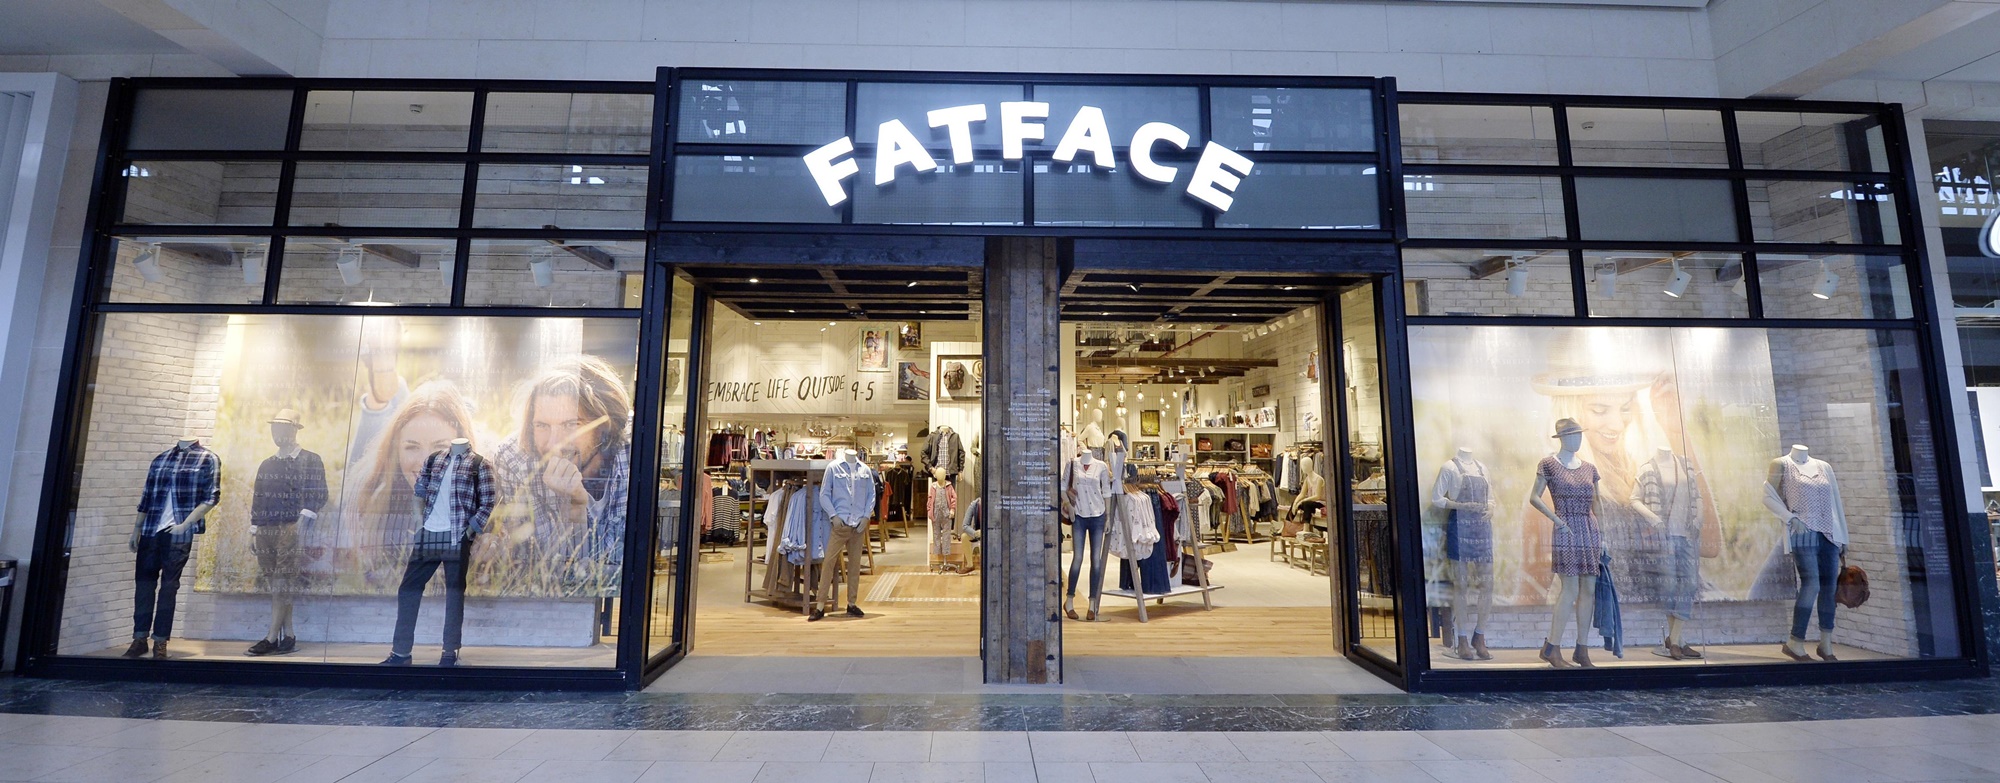 3012901_bluewater_new_fatface_store_089